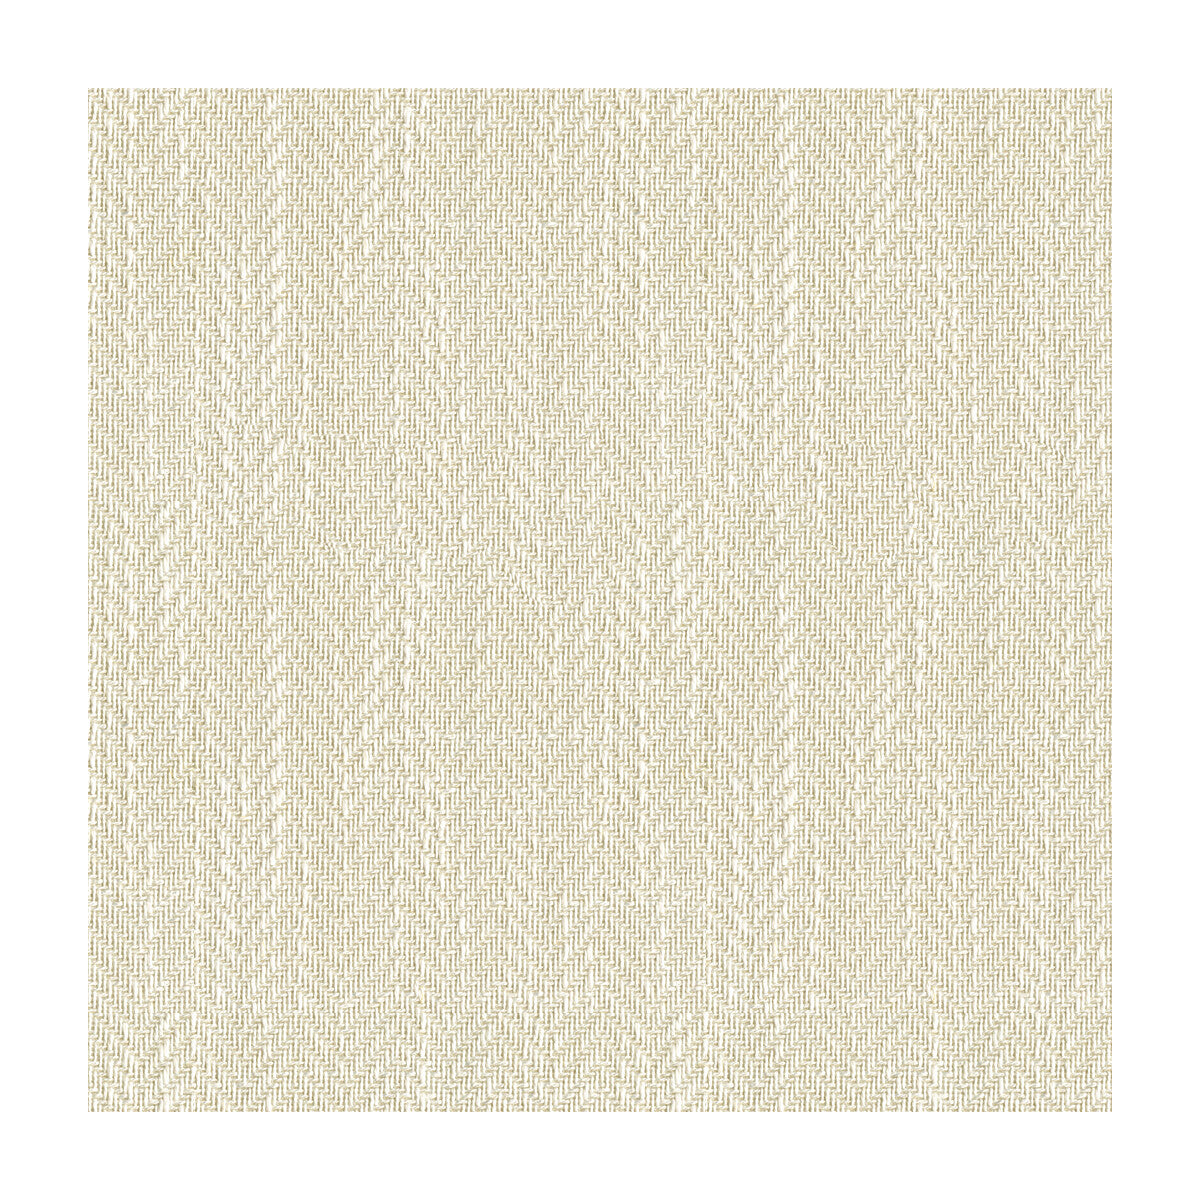 Kravet Basics fabric in 33766-1 color - pattern 33766.1.0 - by Kravet Basics in the Perfect Plains collection